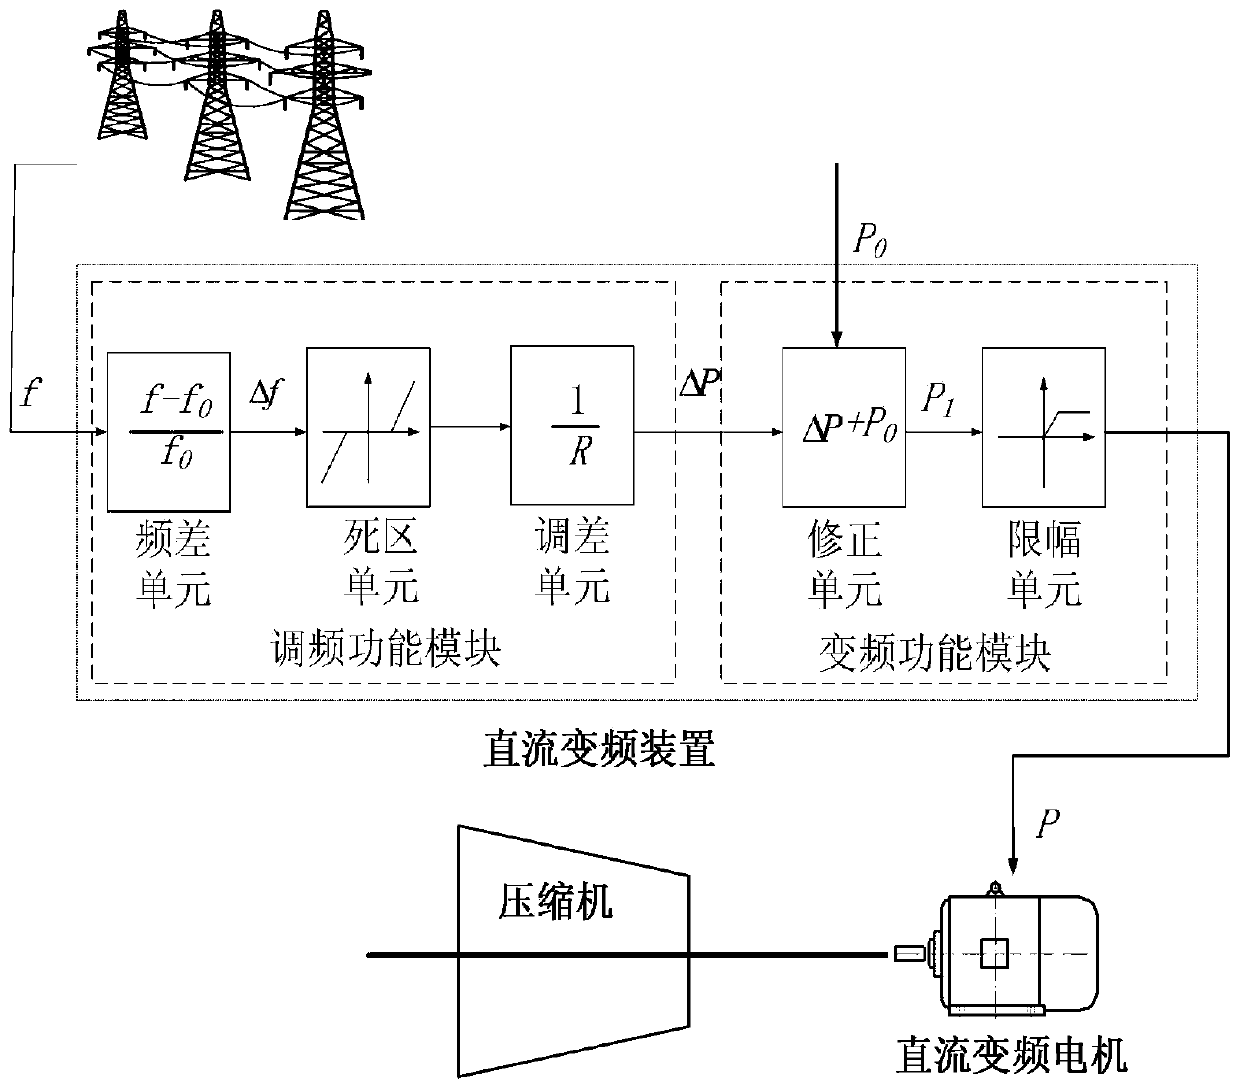 A Method for Compressed Air Energy Storage System to Respond to Grid Frequency Regulation